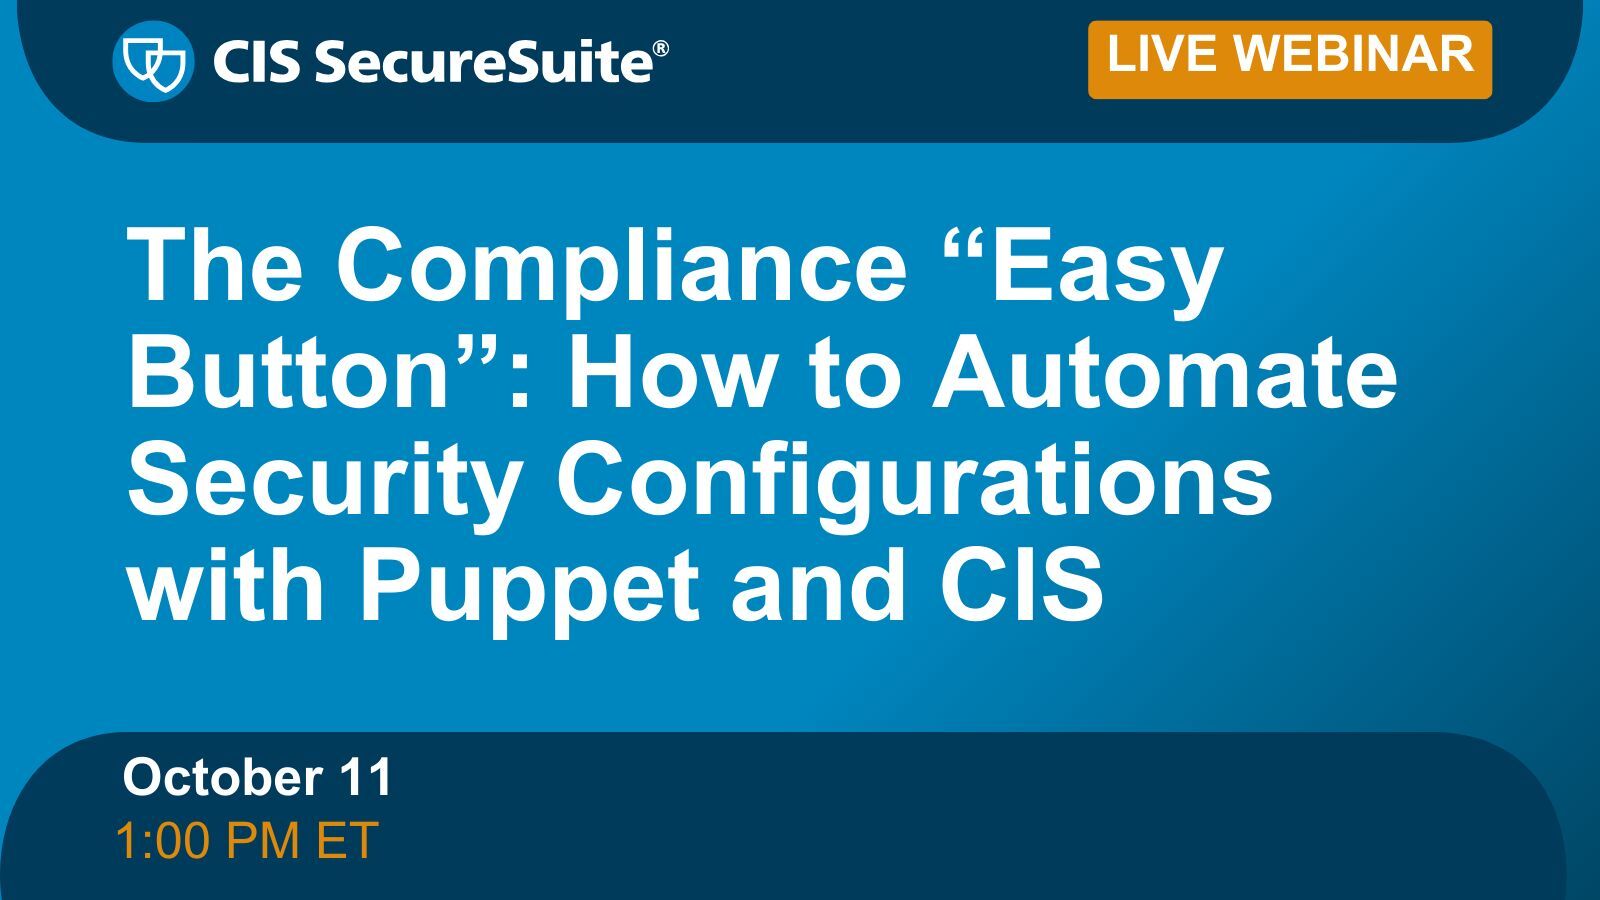 The Compliance “Easy Button”: How to Automate Security Configurations with Puppet and CIS 